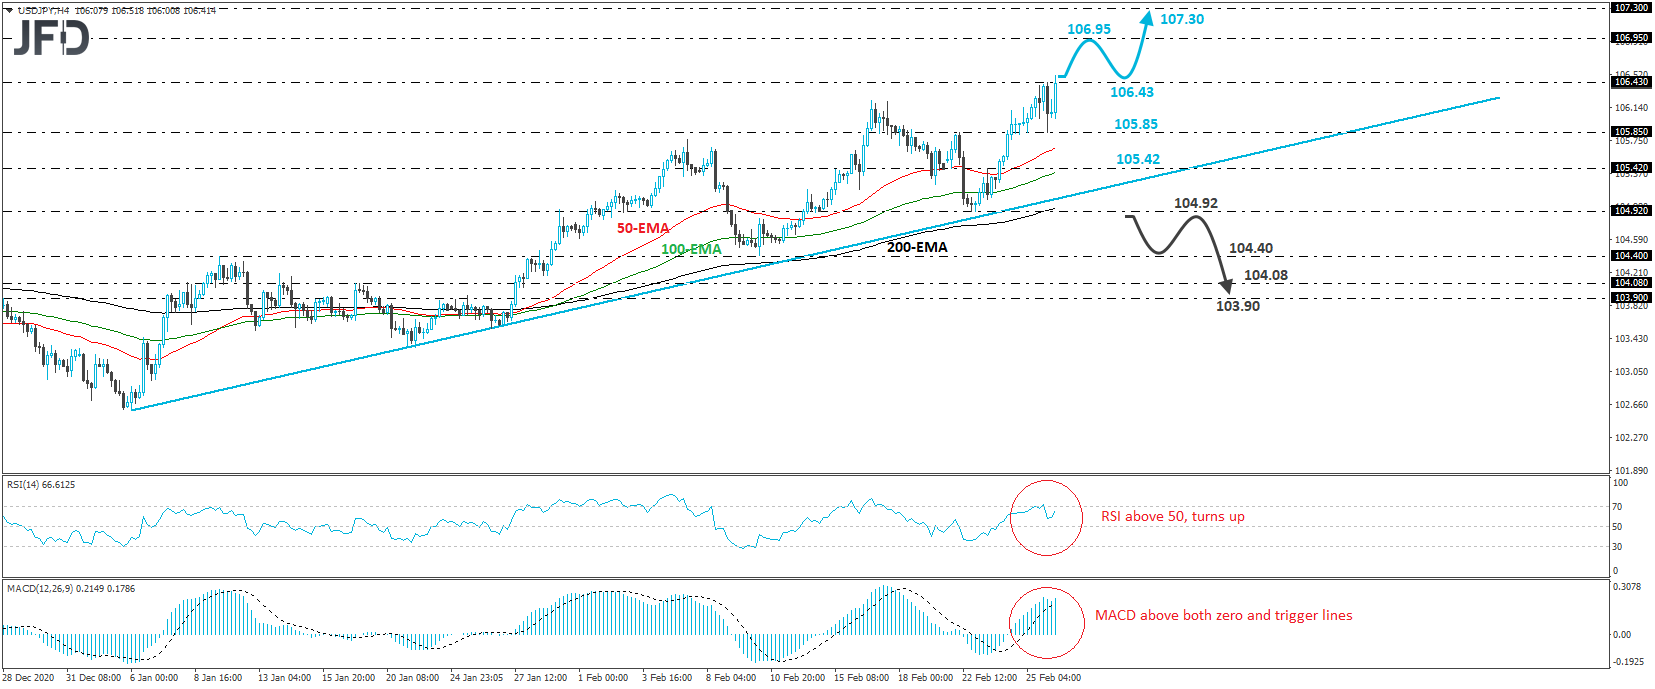 USD/JPY 4-hour chart technical analysis